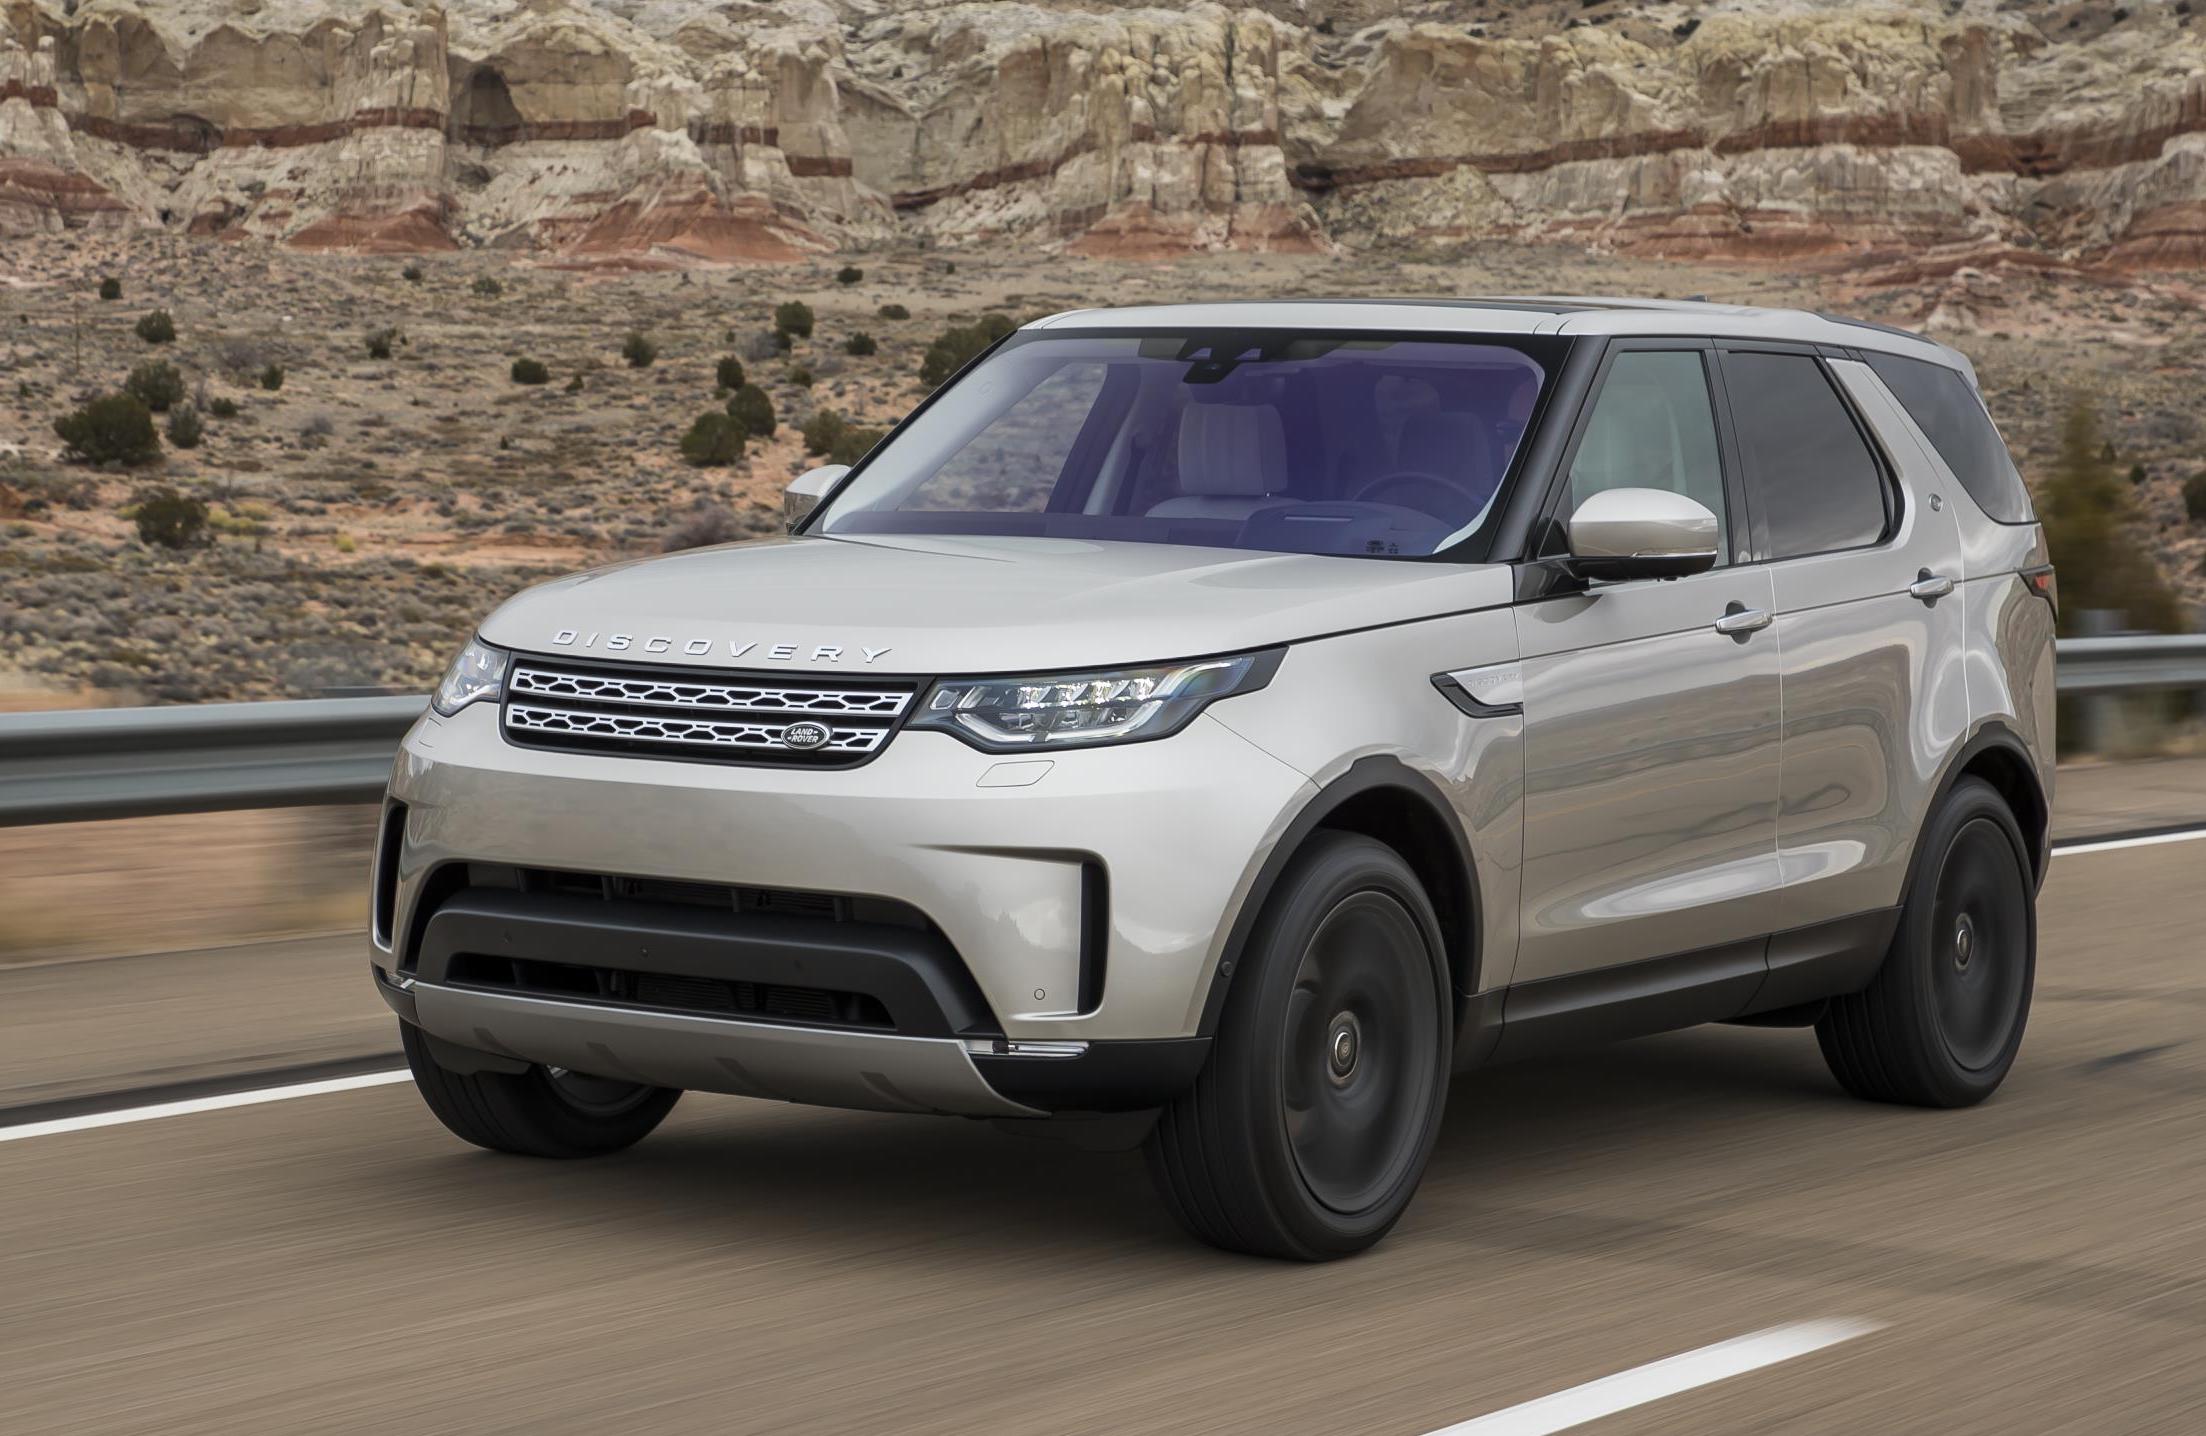 2021 Land Rover Discovery update to bring hybrid tech – report